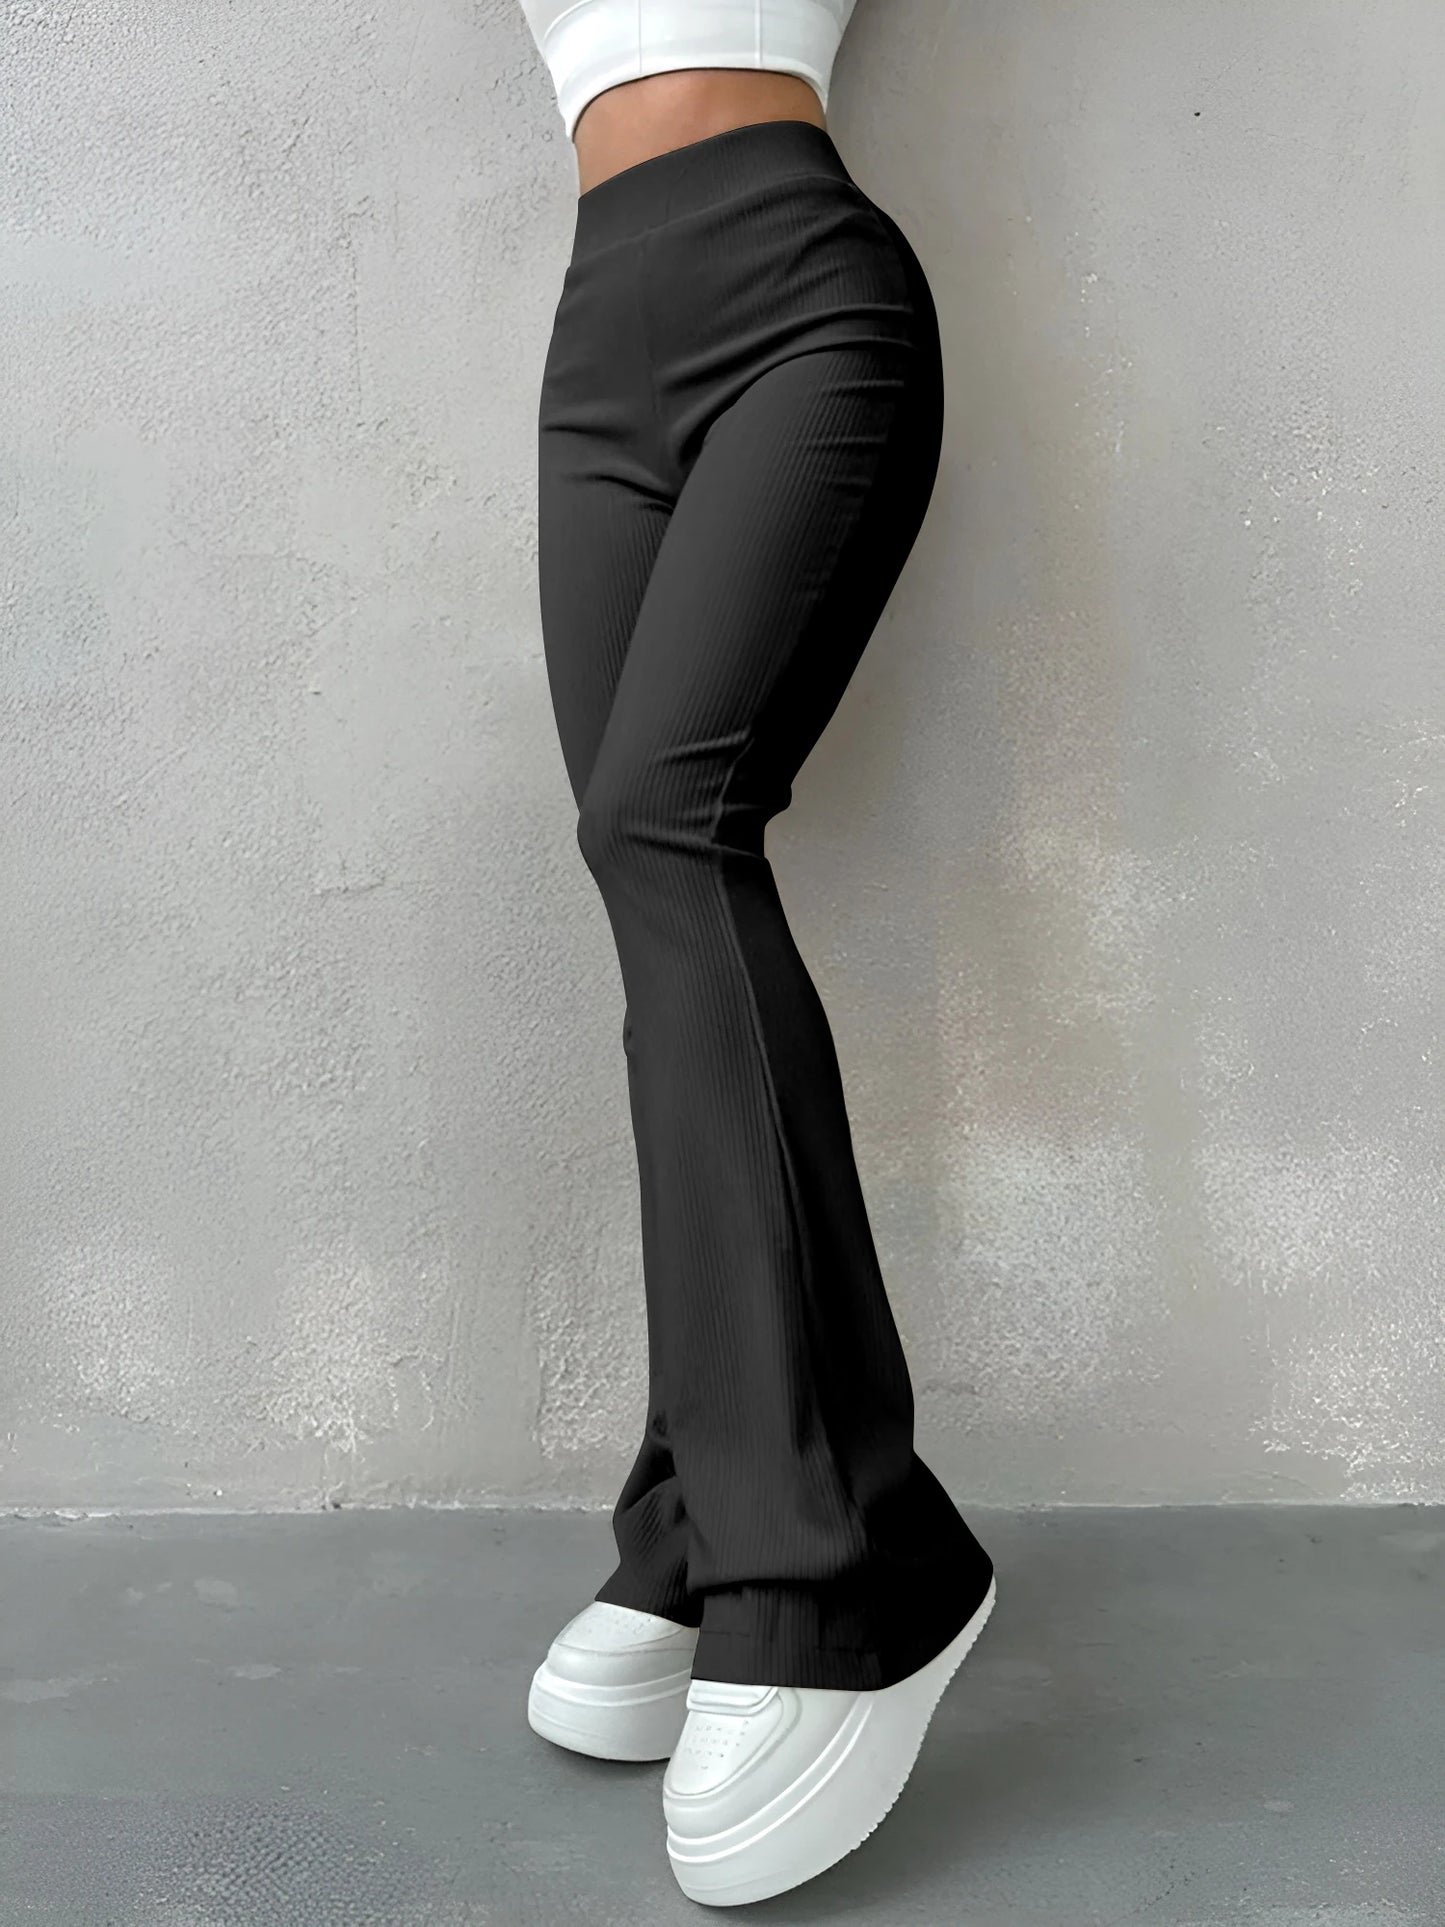 Sporty Pants- Women High-Waisted Flare Leggings for Casual to Dressy Looks- Black- Chuzko Women Clothing